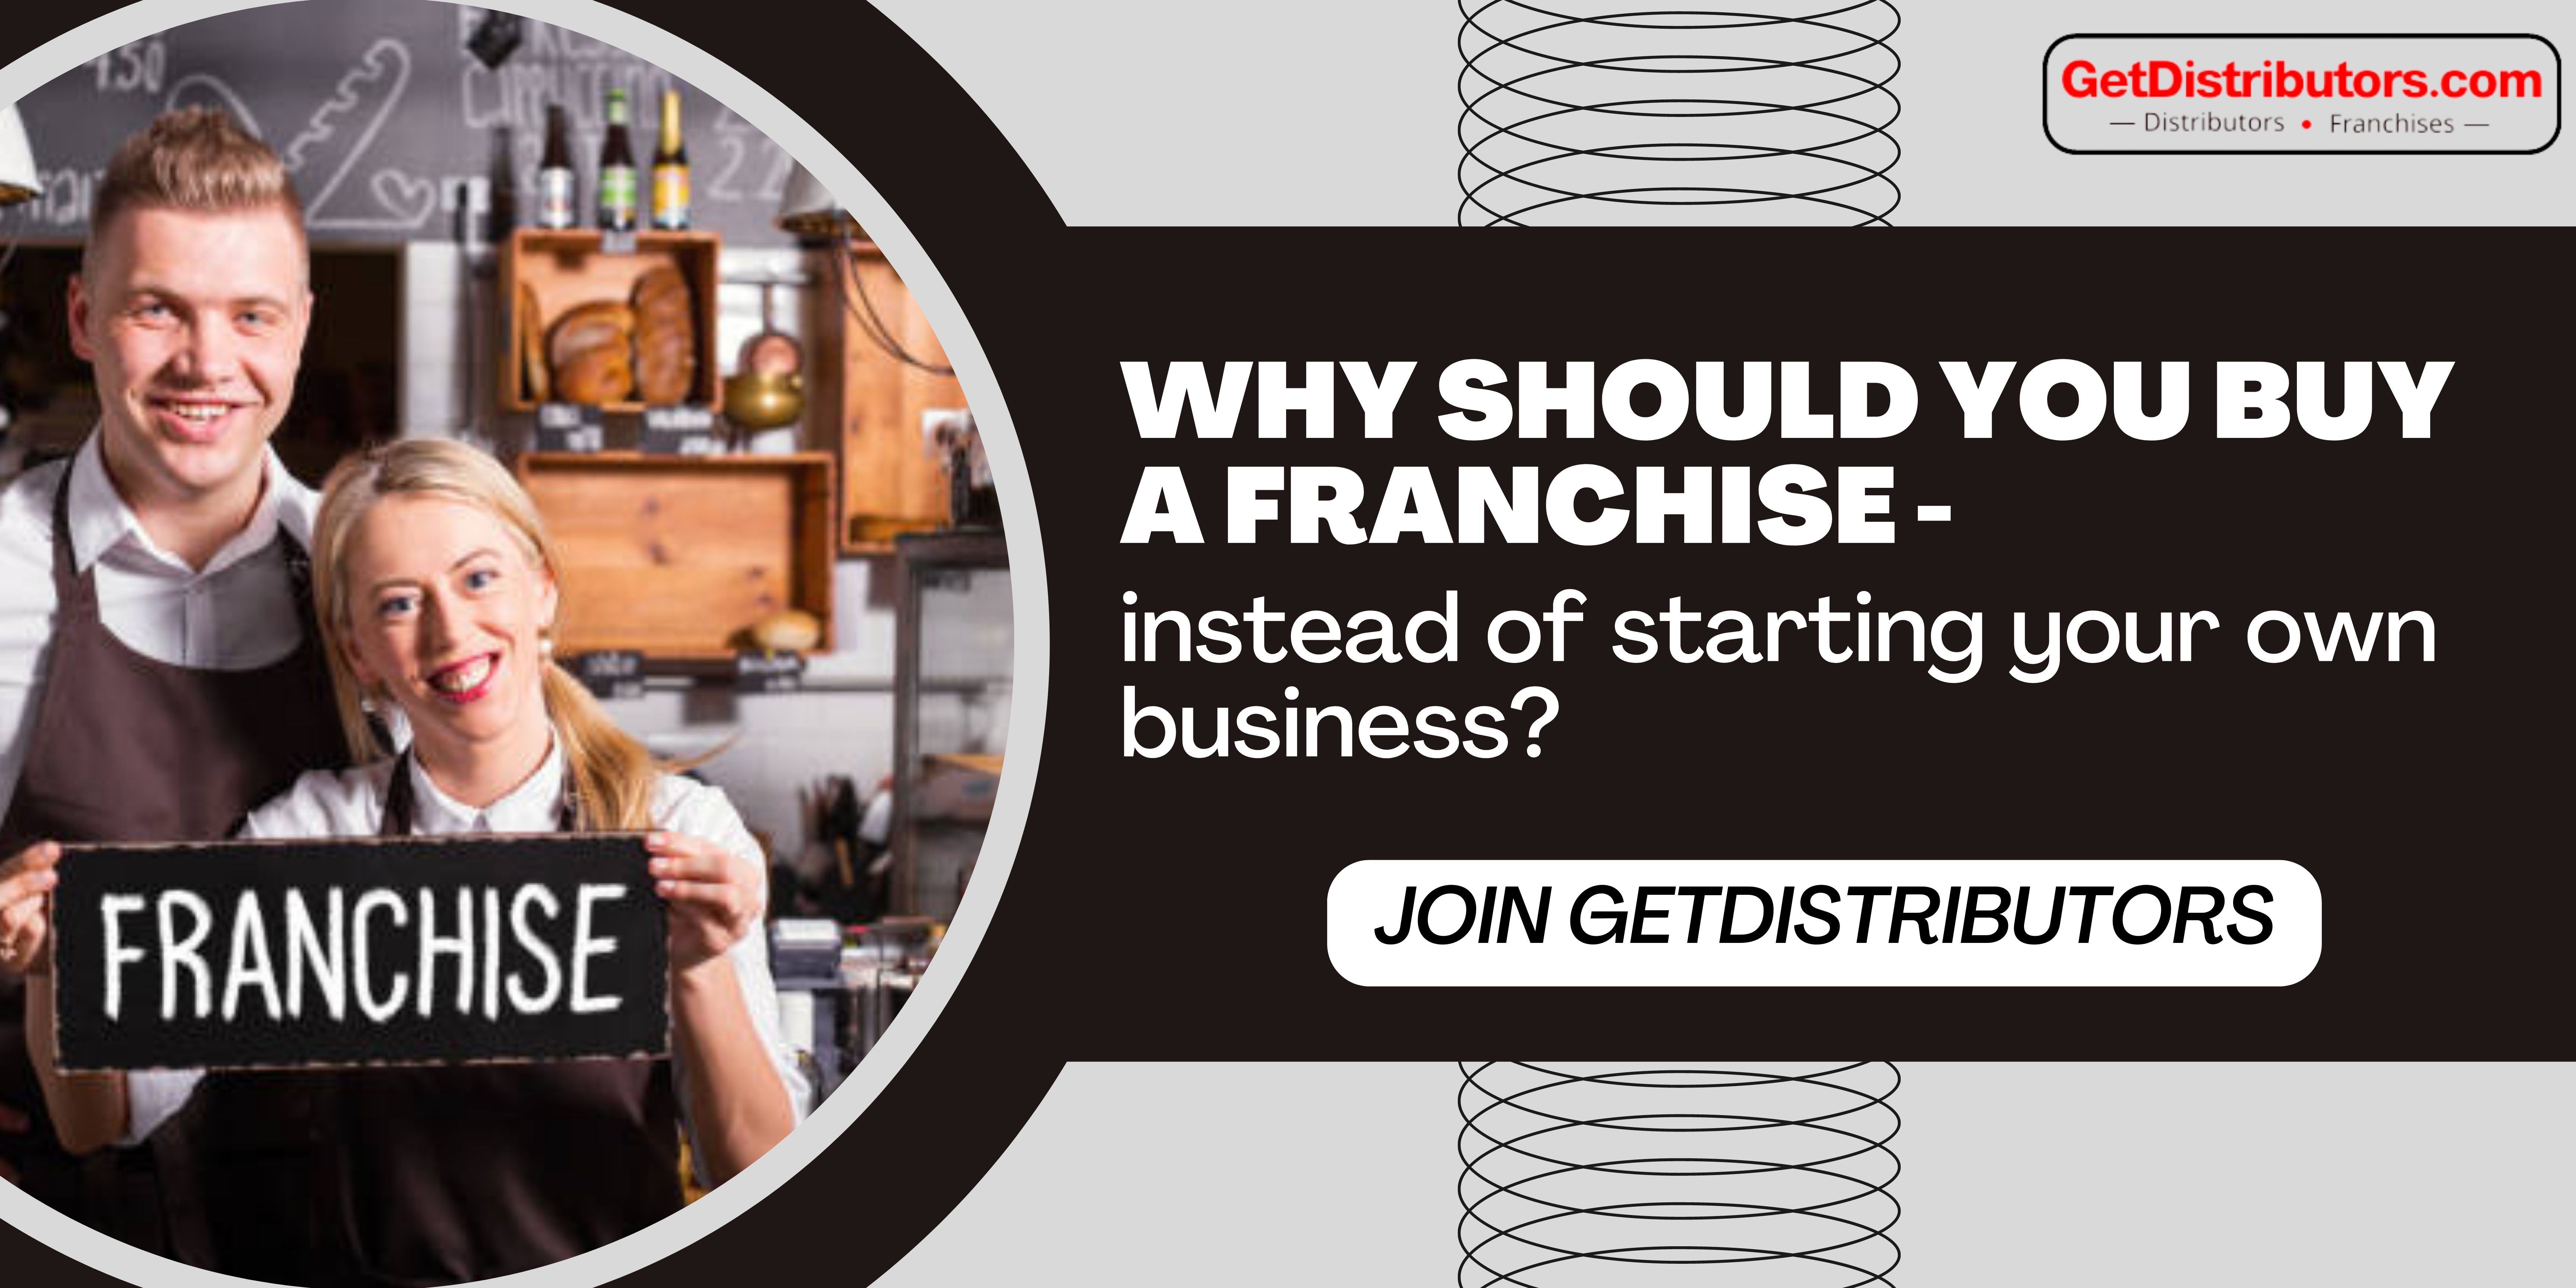 Why should you buy a franchise instead of starting your own business?